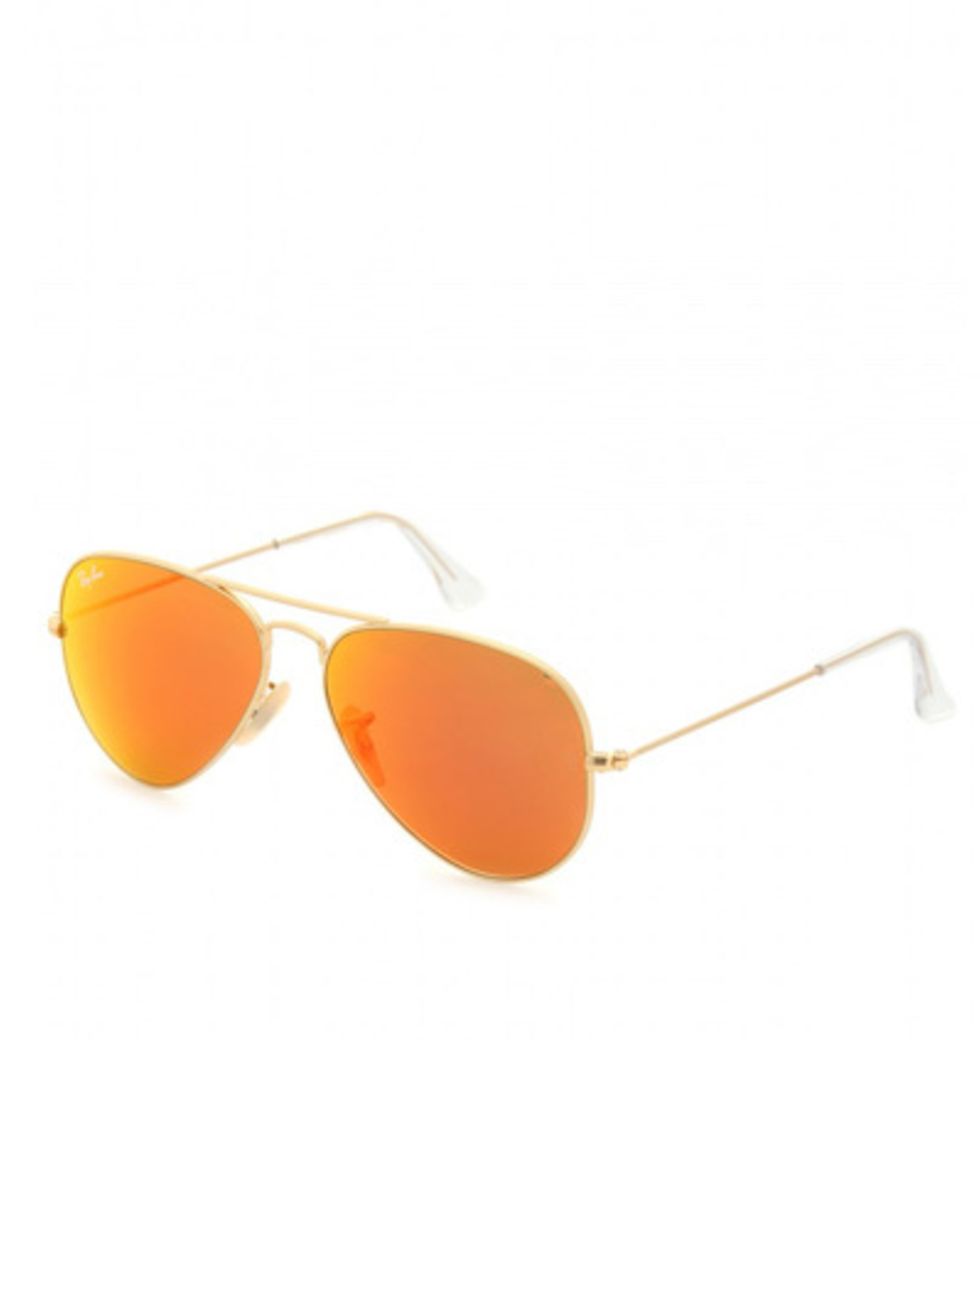 Eyewear, Glasses, Vision care, Brown, Goggles, Sunglasses, Product, Yellow, Orange, Personal protective equipment, 